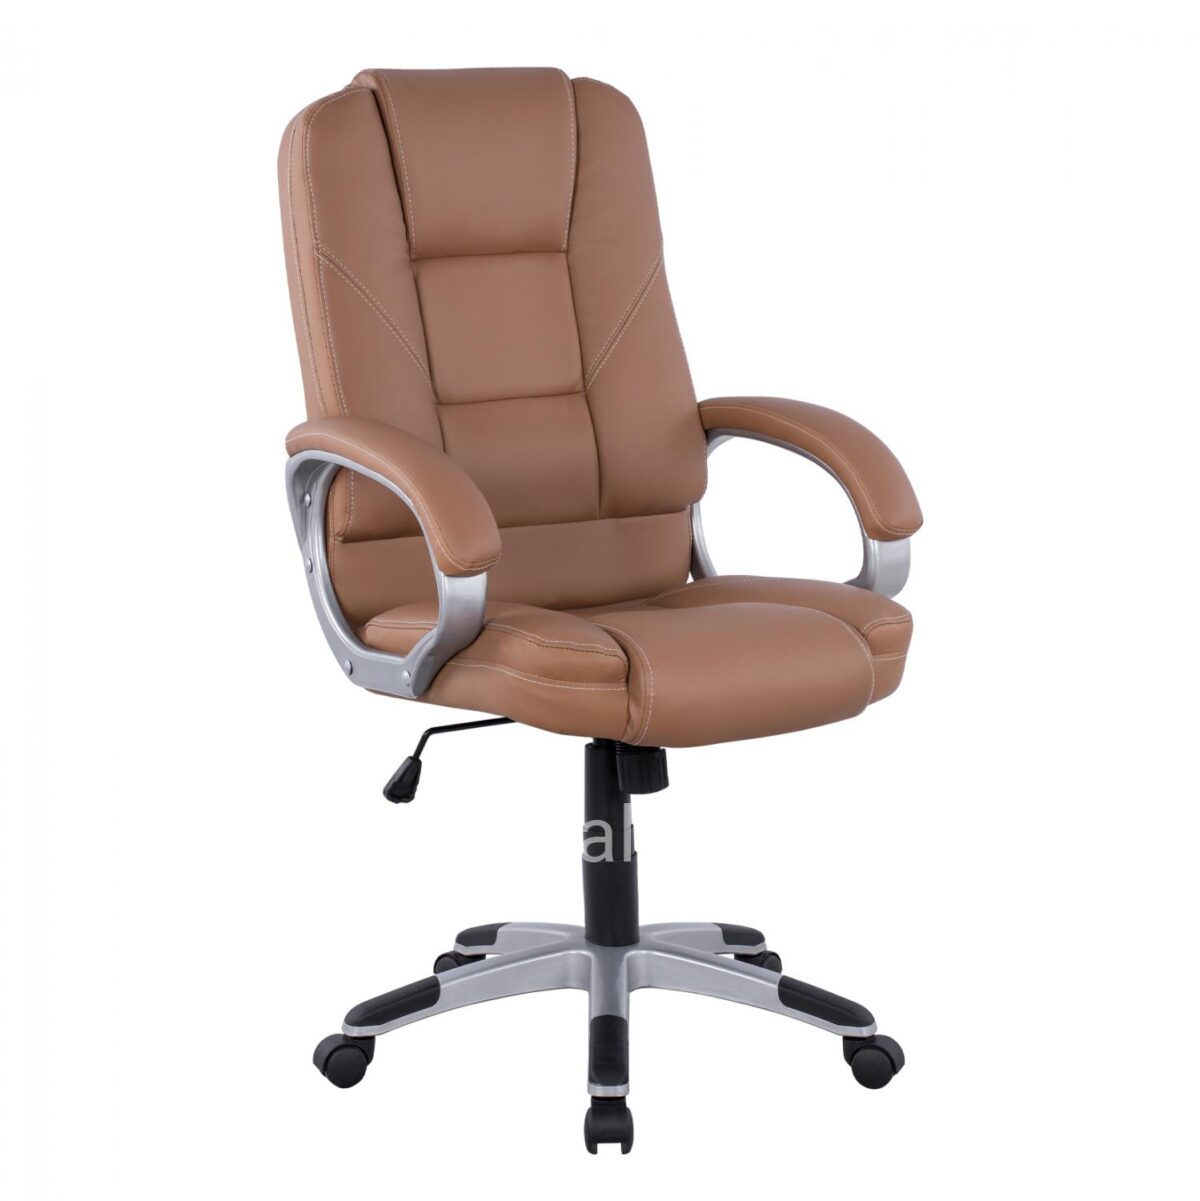 Office chair Director's HM1091.09 Camel 64x71x118 cm